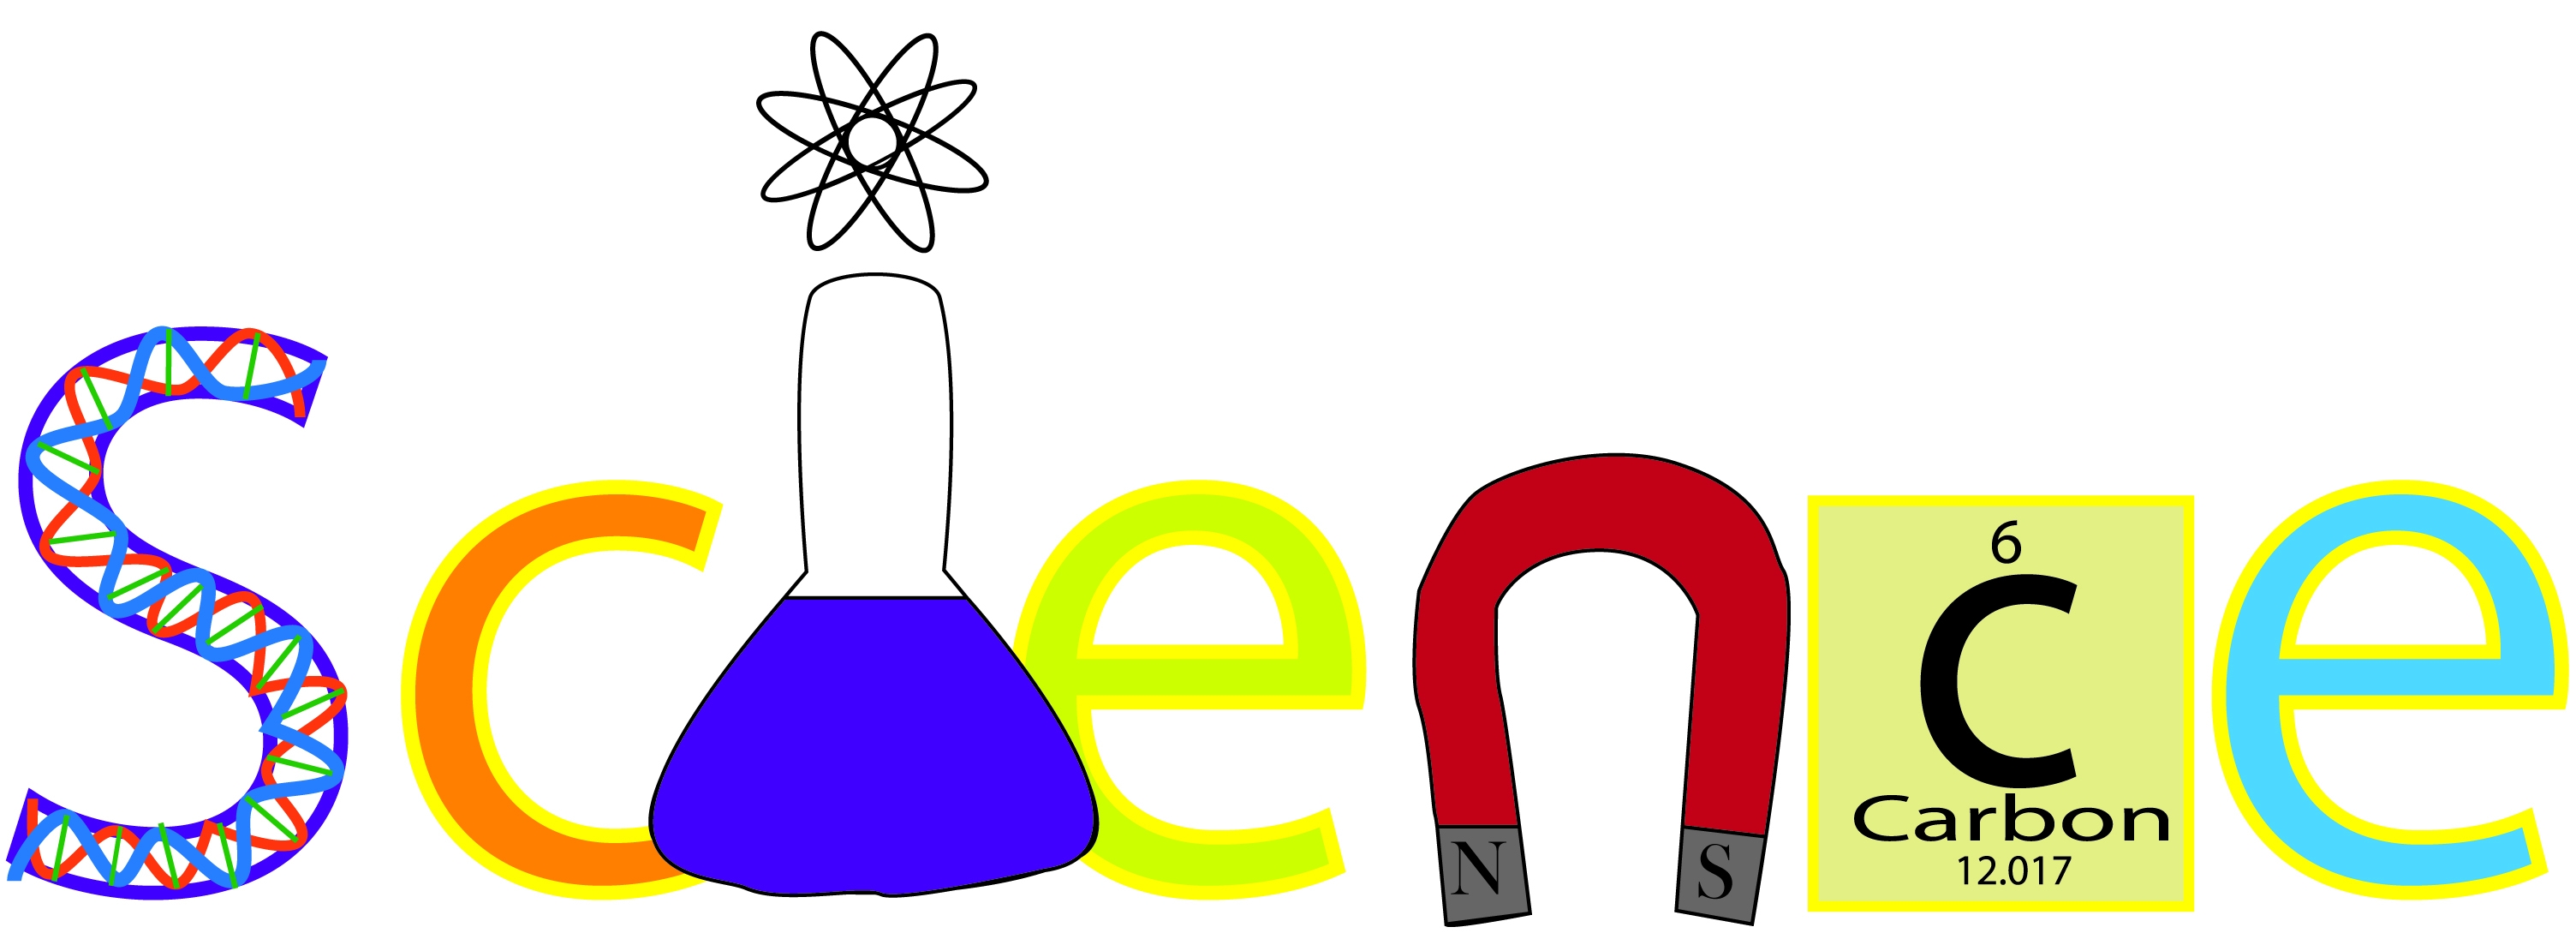 Project In Science Word Clipart 